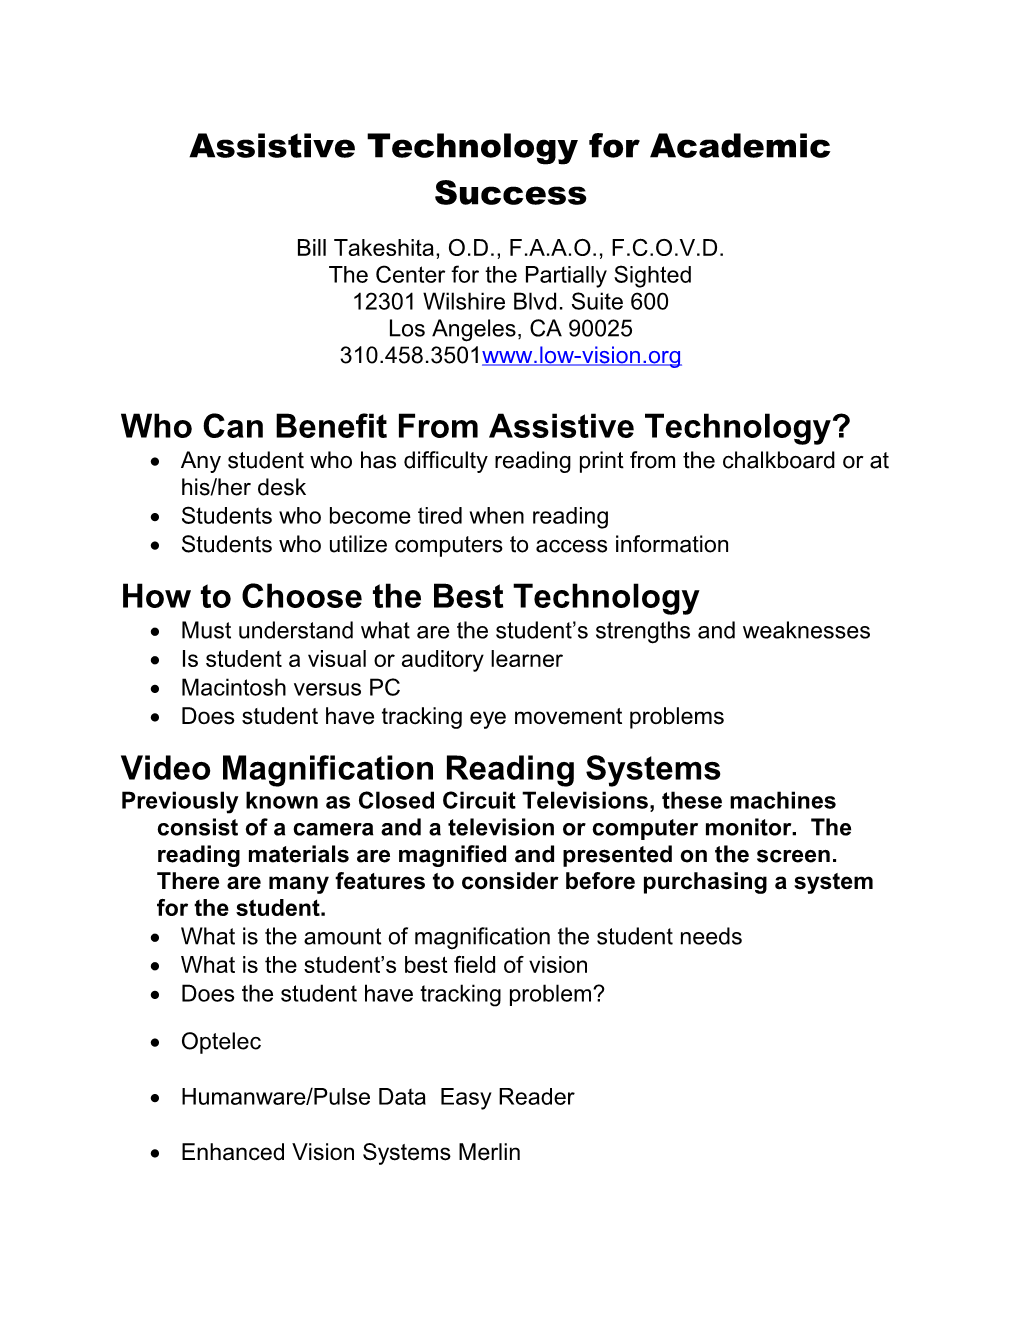 Assistive Technology for Academic Success